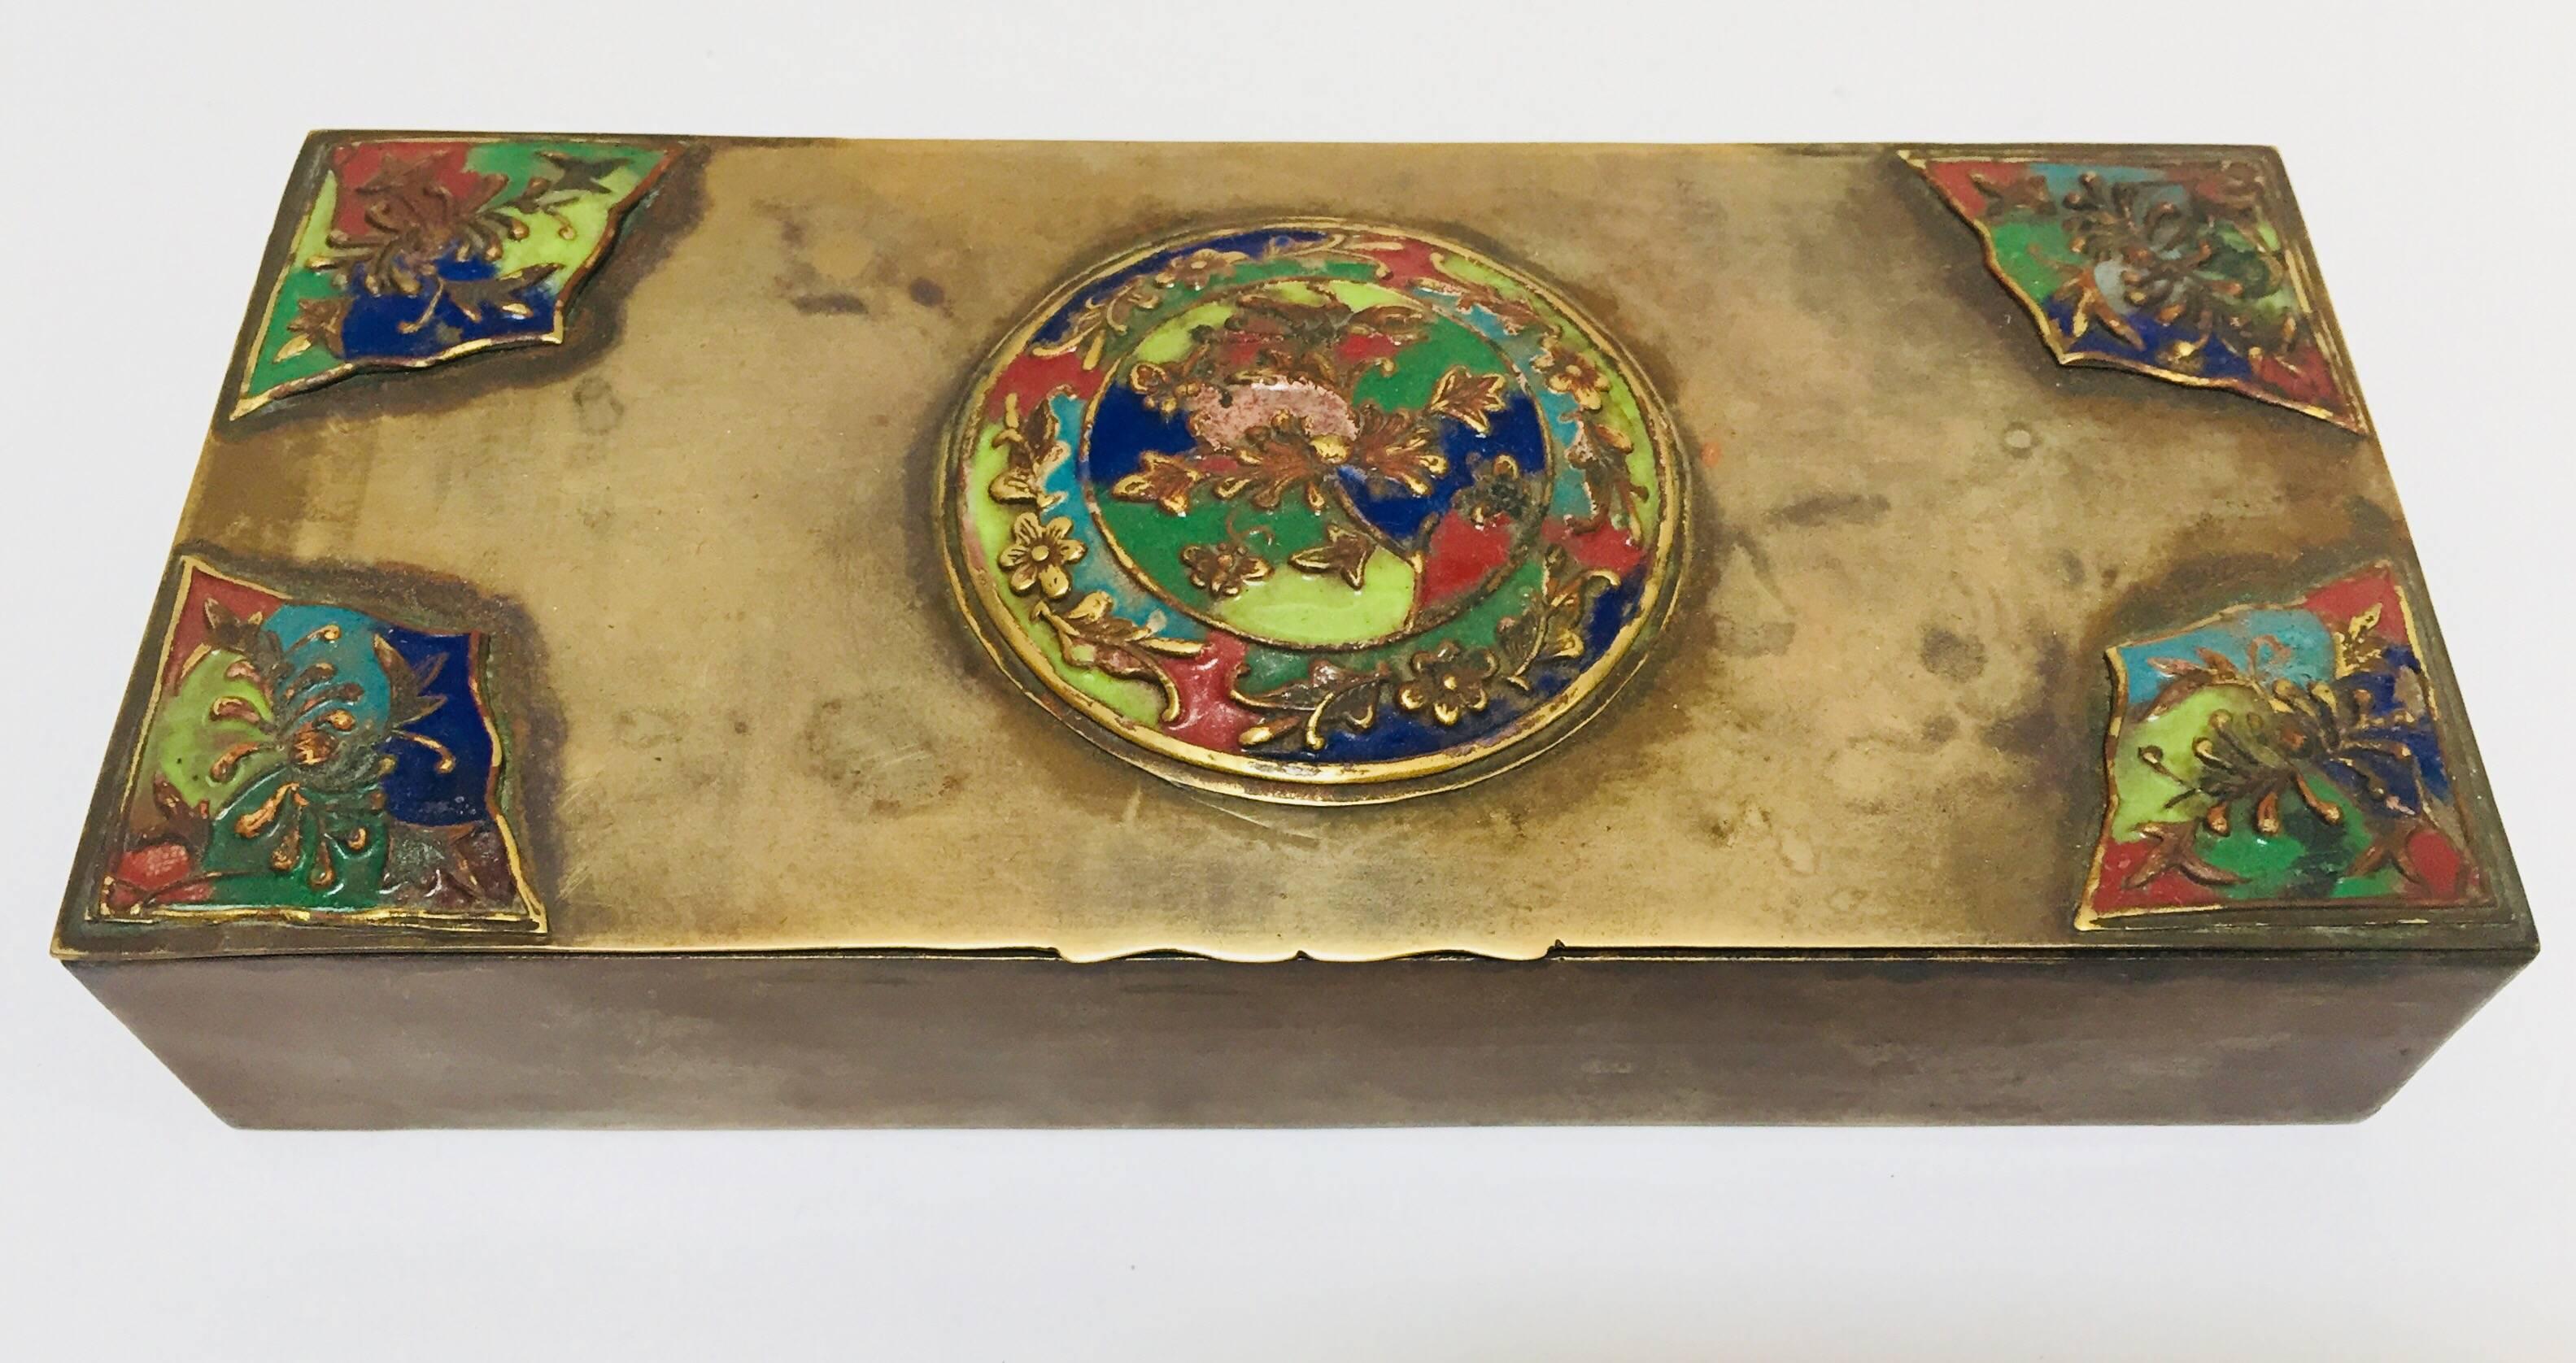 handcrafted brass Art Deco lidded box with enameled decoration.
Vintage decorative metal Mid-Century Modern brass lidded box trinket.
Perfect example of Art Deco charm, an exquisite brass hinged box. 
The box features made from brass, and enamel,